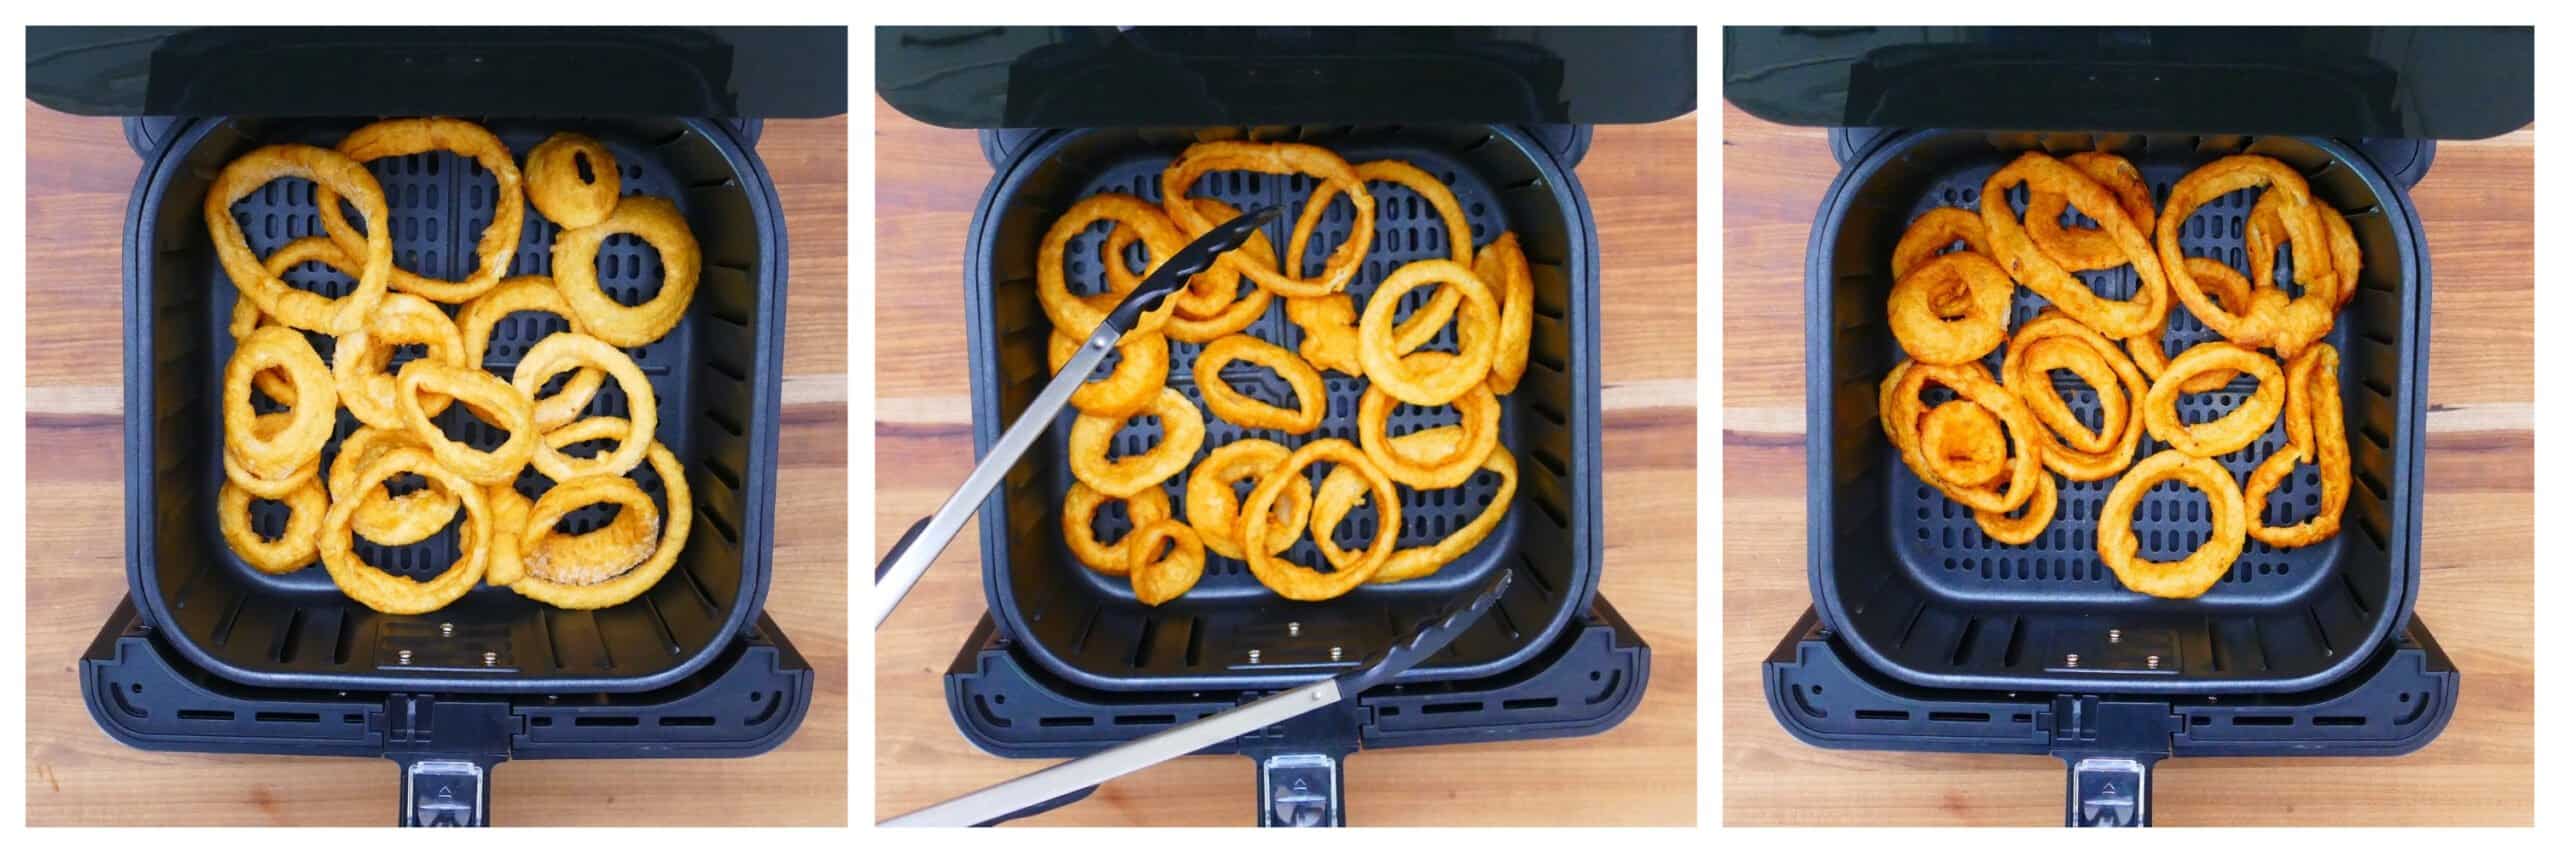 Air fryer onions rings instructions collage - frozen, being turned with tongs, cooked - in air fryer basket